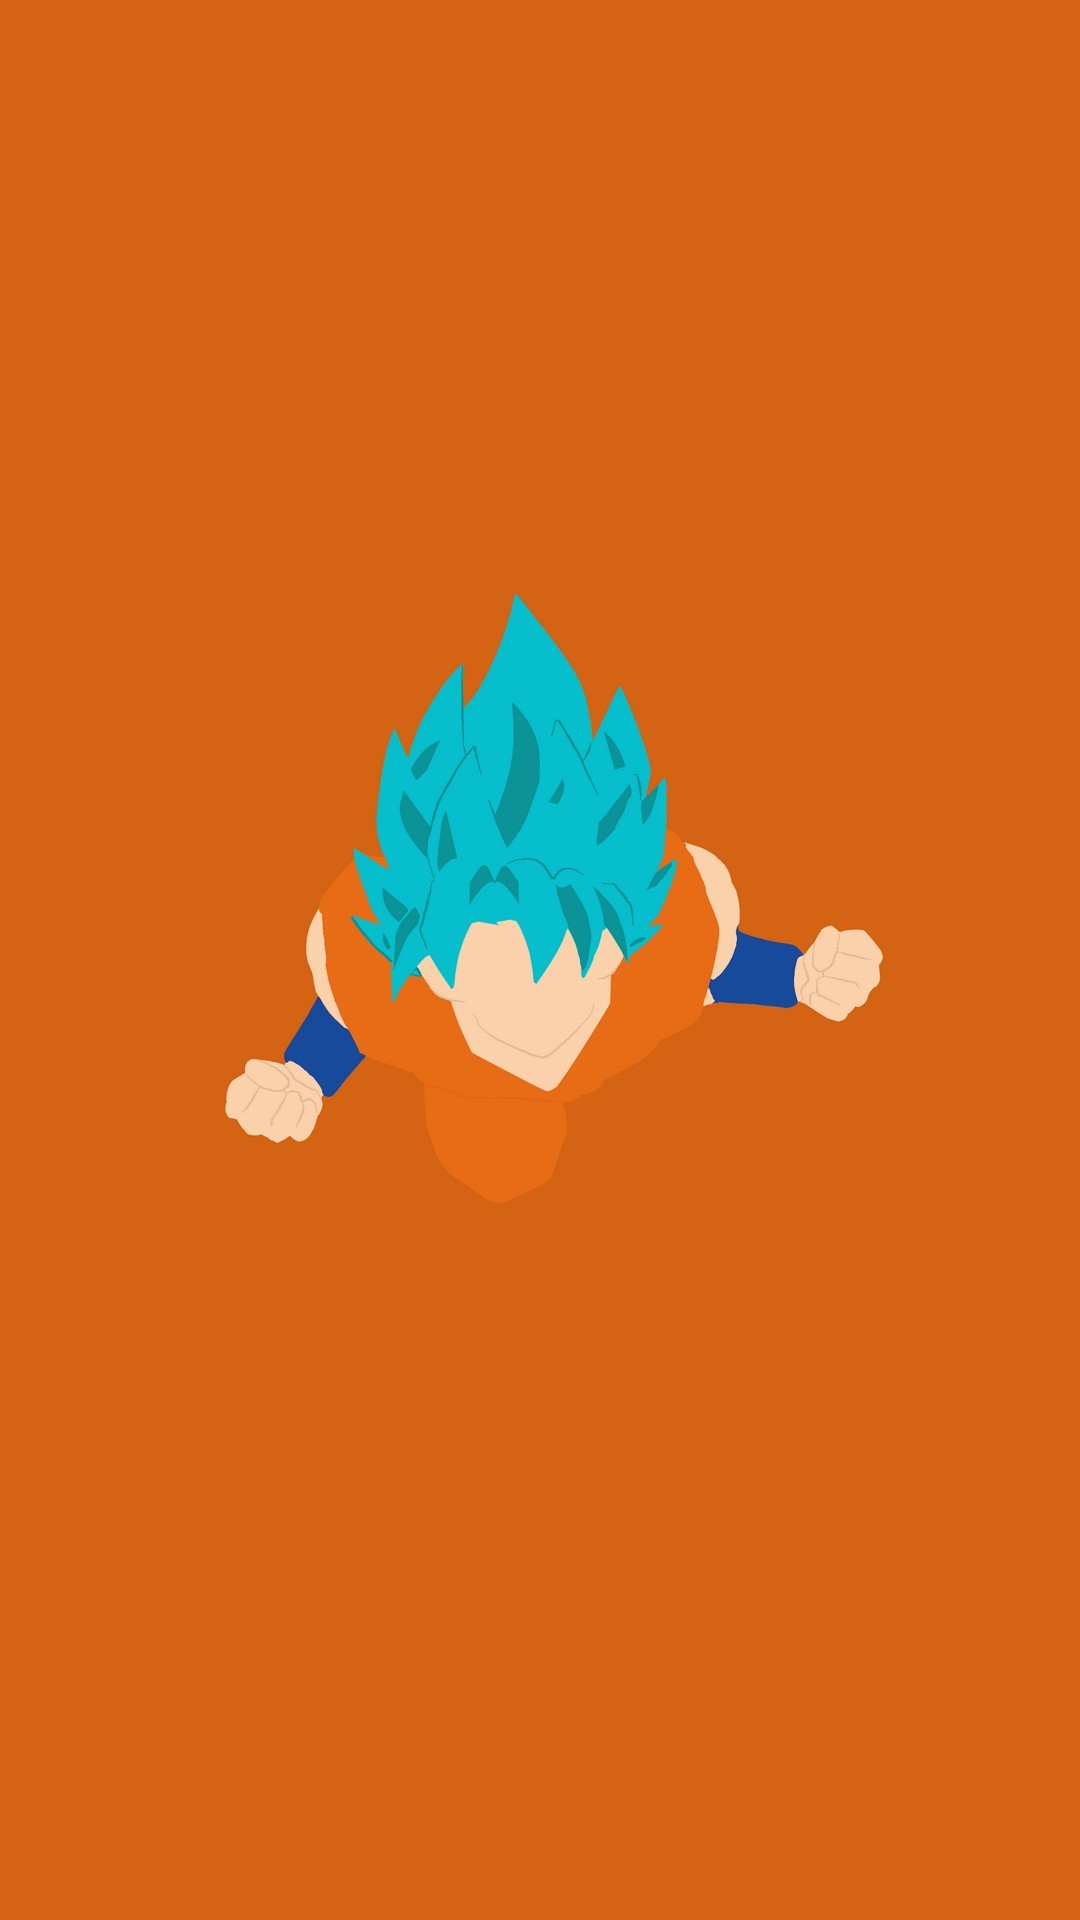 Goku SSJ iPhone Wallpaper with resolution 1080X1920 pixel. You can make this wallpaper for your iPhone 5, 6, 7, 8, X backgrounds, Mobile Screensaver, or iPad Lock Screen